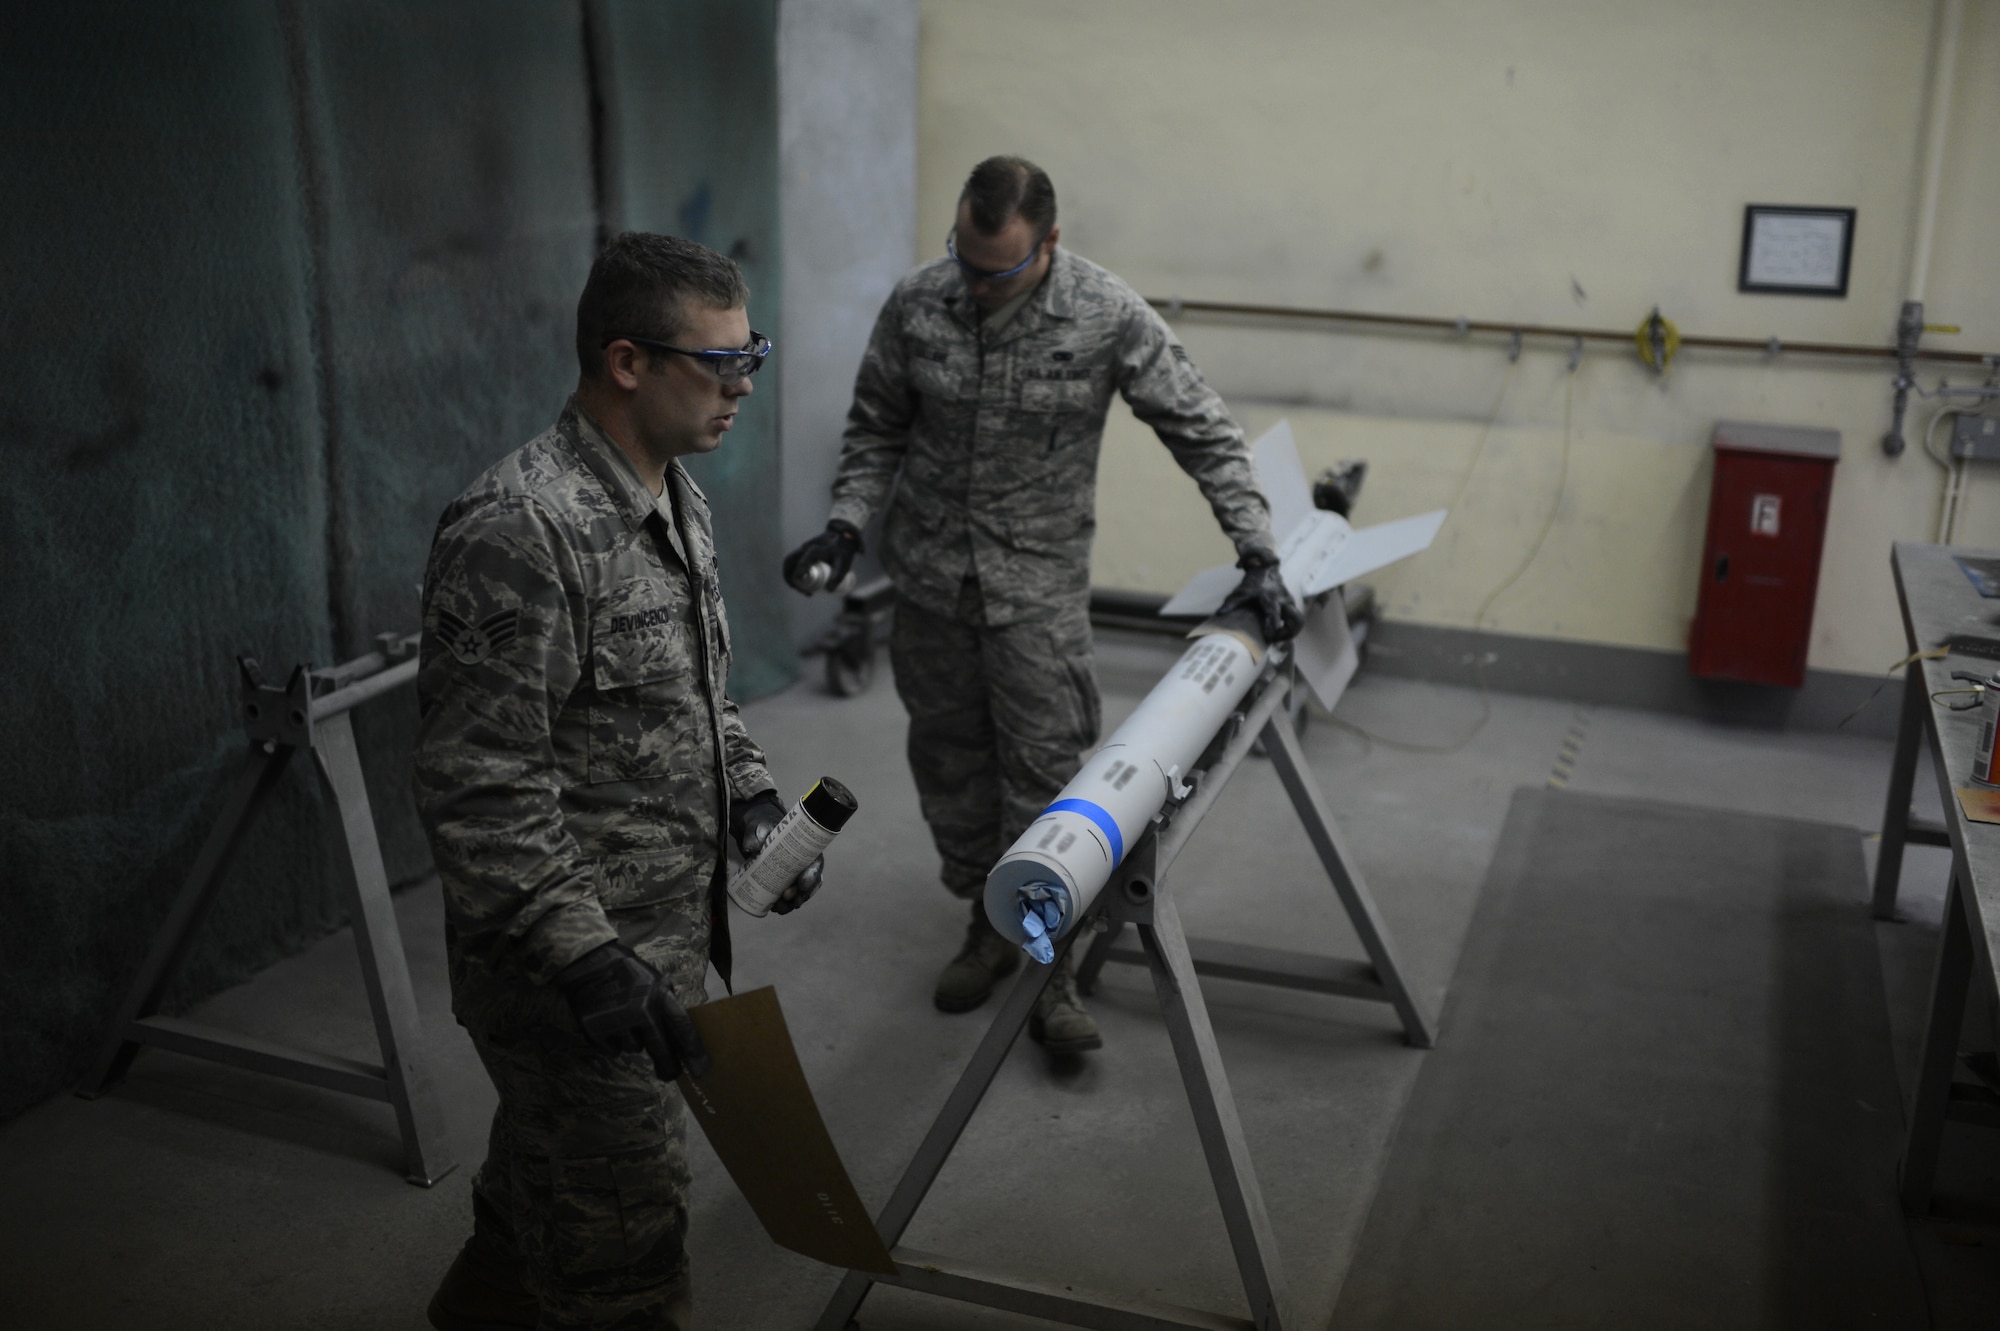 U.S. Air Force Senior Airmen Daniel Devincenzo and Senior Airman Anthony Valliere, 52nd Equipment Maintenance Squadron precision guided munitions technicians and natives of Parsippany, N.J., and Chandler, Ariz. respectively, apply the finishing markings on an AIM-9 sidewinder missile on Spangdahlem Air Base, Germany, Sept. 10, 2014. Airmen use training rounds, which are hollow shells with no electronic components and marked with blue rings, to practice real-world operations without handling or damaging live munitions. (U.S. Air Force photo by Senior Airman Gustavo Castillo/Released) 